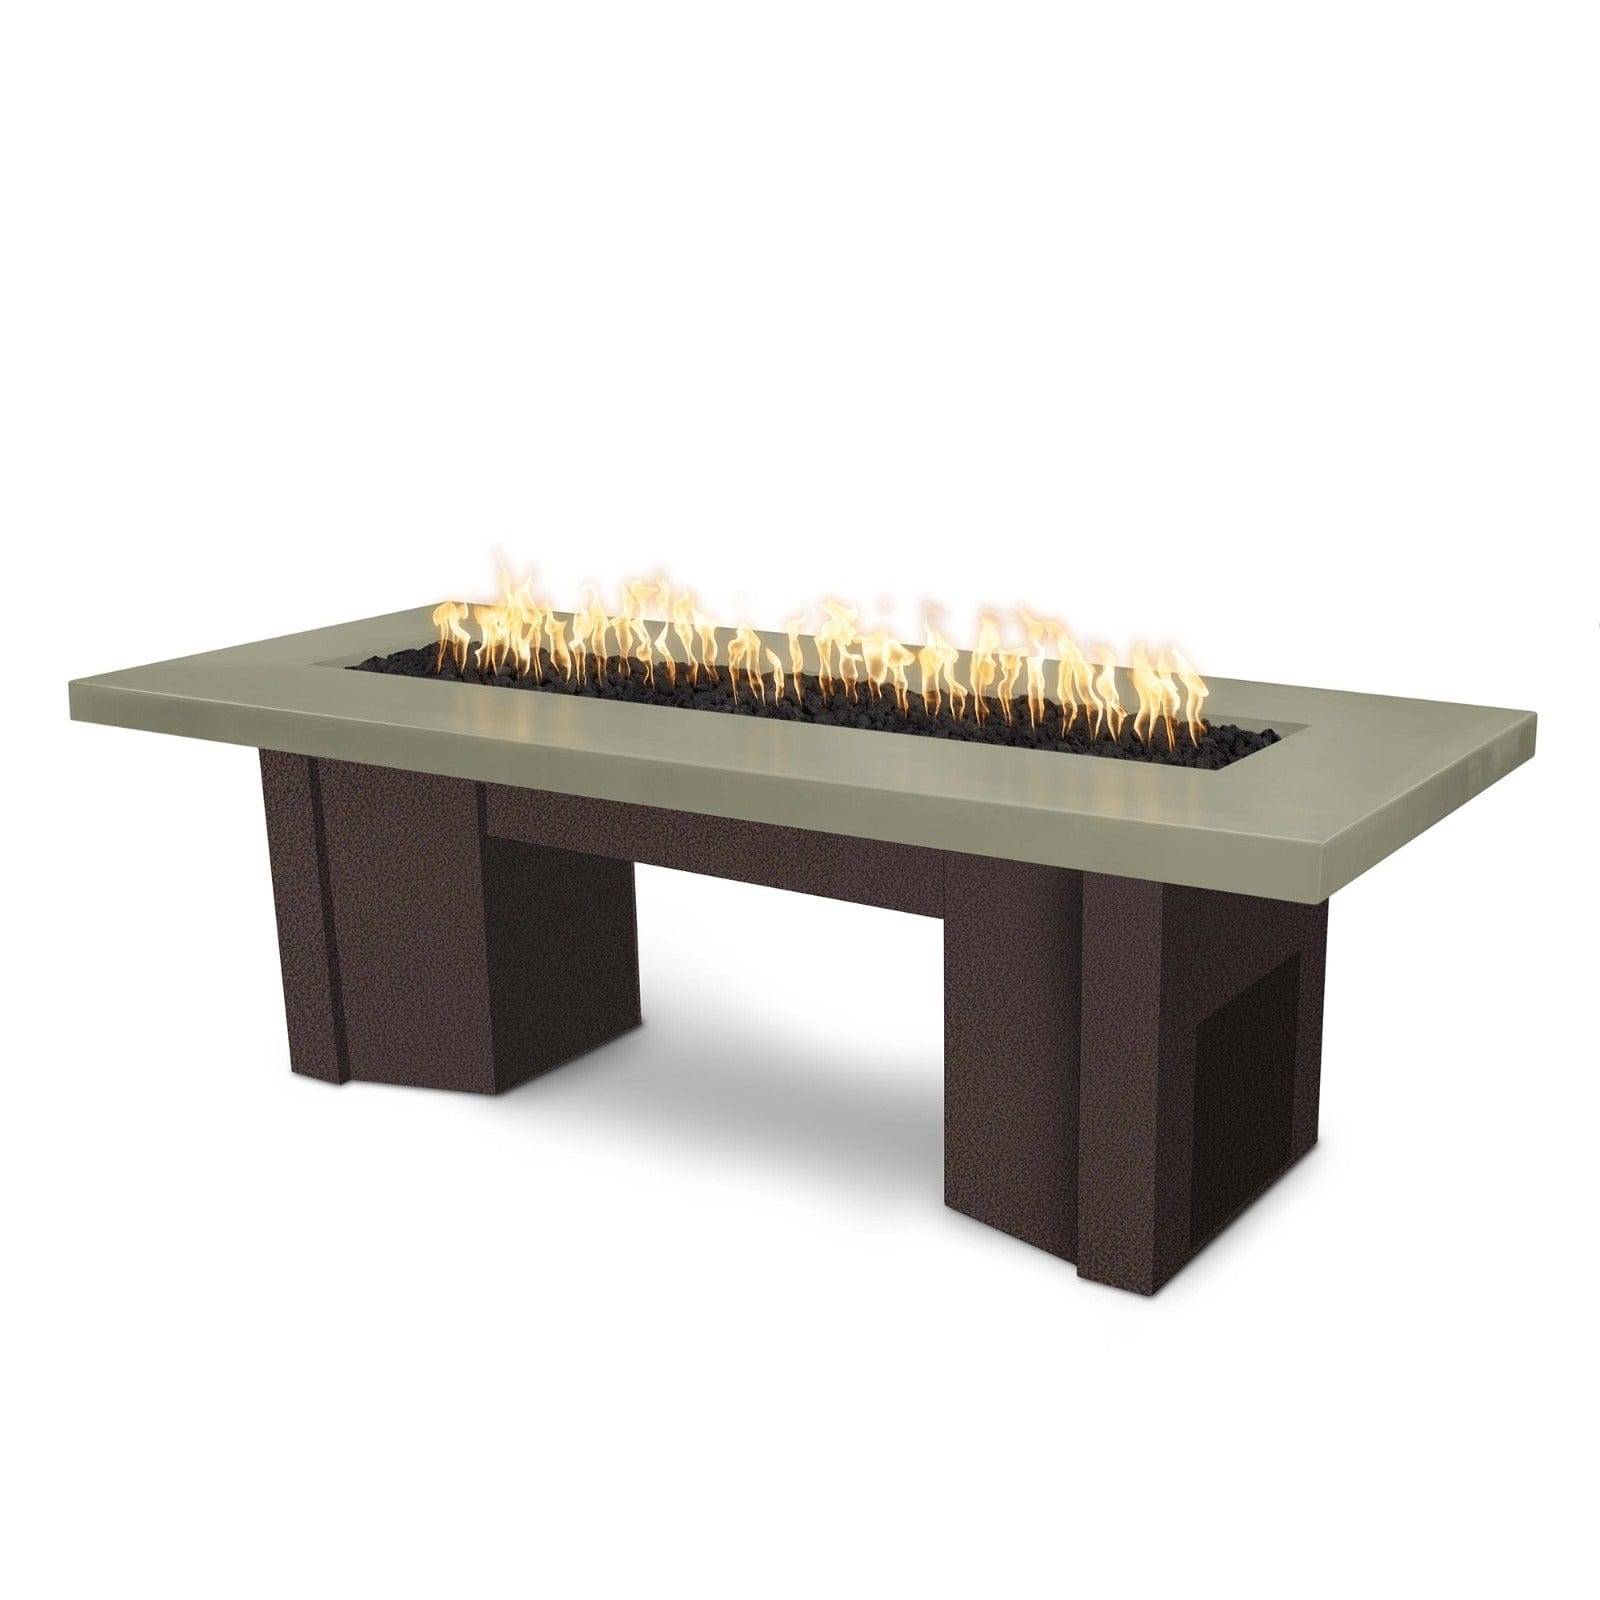 The Outdoor Plus Fire Features Ash (-ASH) / Copper Vein Powder Coated Steel (-CPV) The Outdoor Plus 78" Alameda Fire Table Smooth Concrete in Natural Gas - Flame Sense System with Push Button Spark Igniter / OPT-ALMGFRC78FSEN-NG